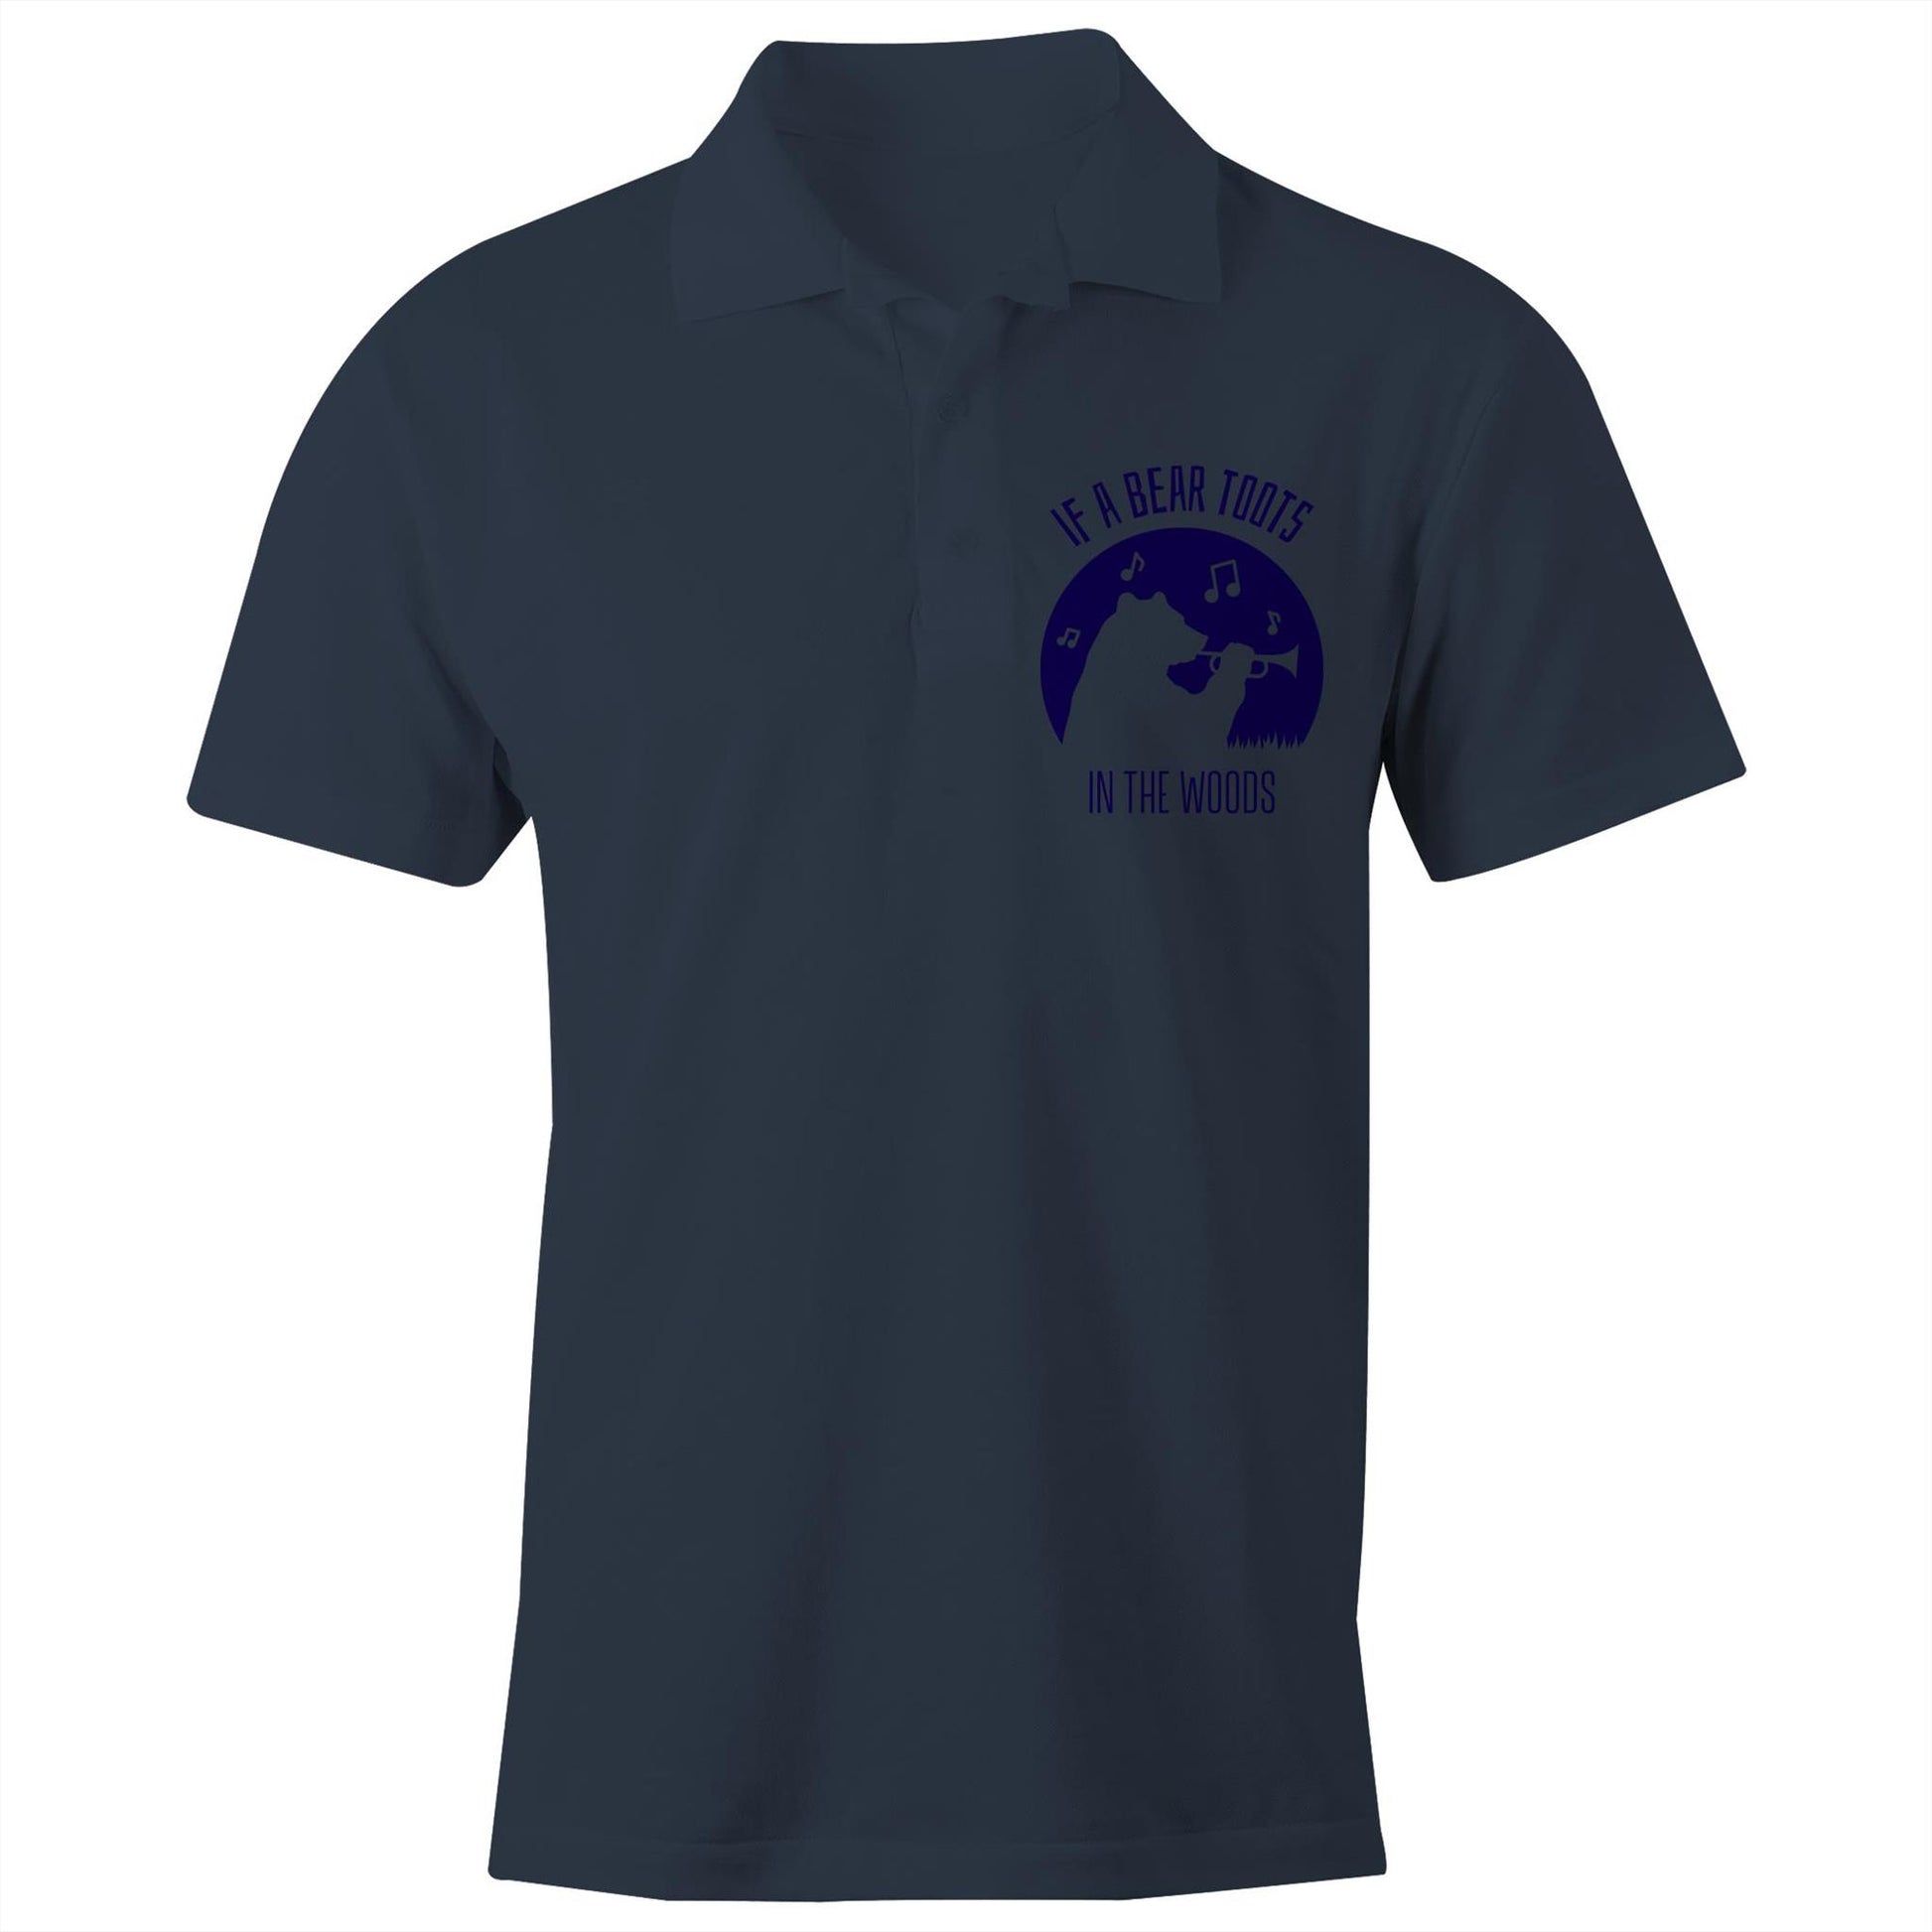 Trumpet Player, If A Bear Toots In The Woods - Chad S/S Polo Shirt, Printed Navy Polo Shirt Music